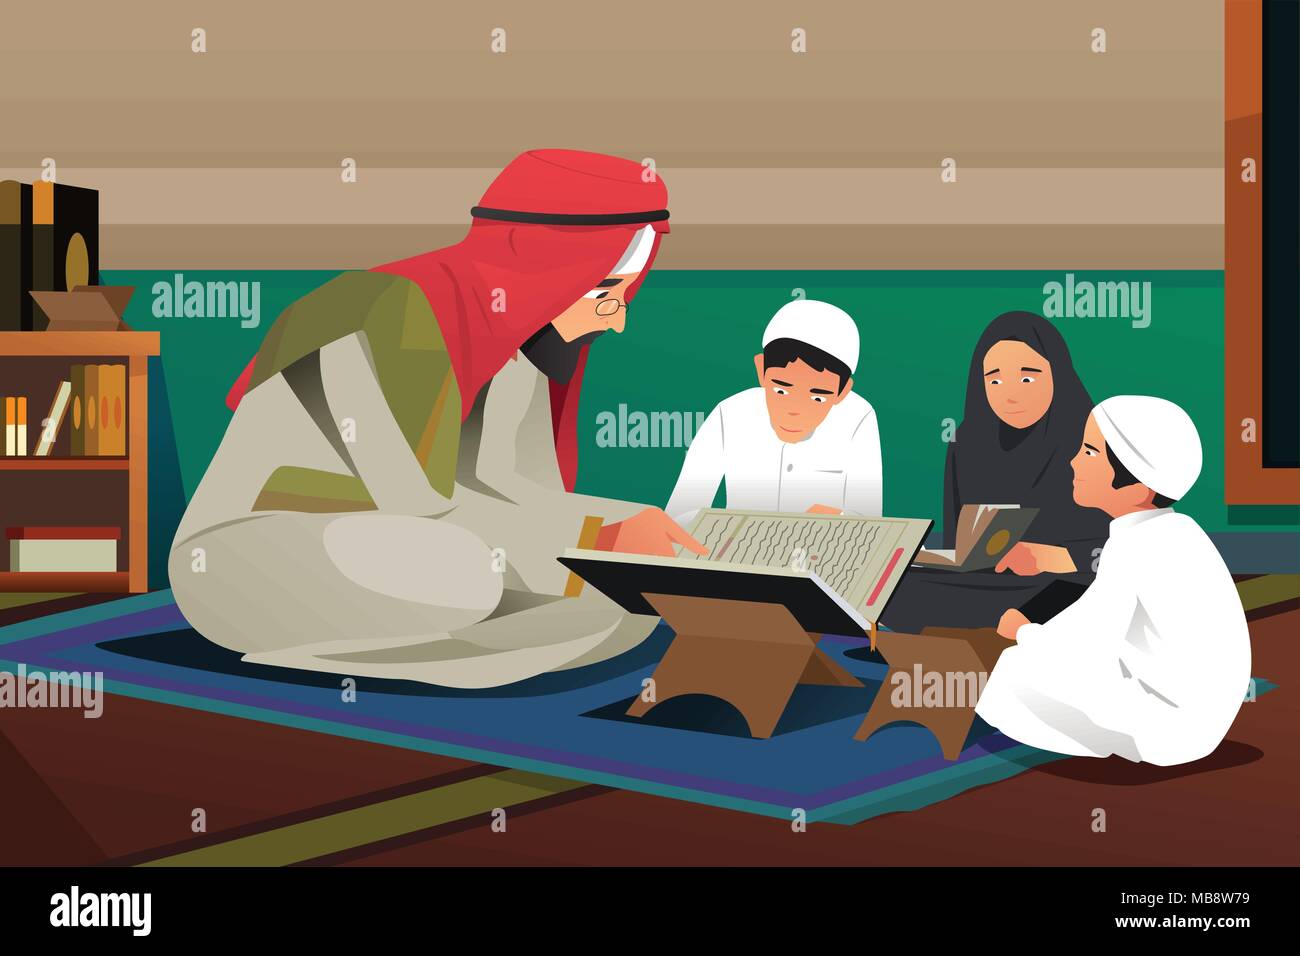 A vector illustration of Imam Reading Quran With His Students Stock Vector